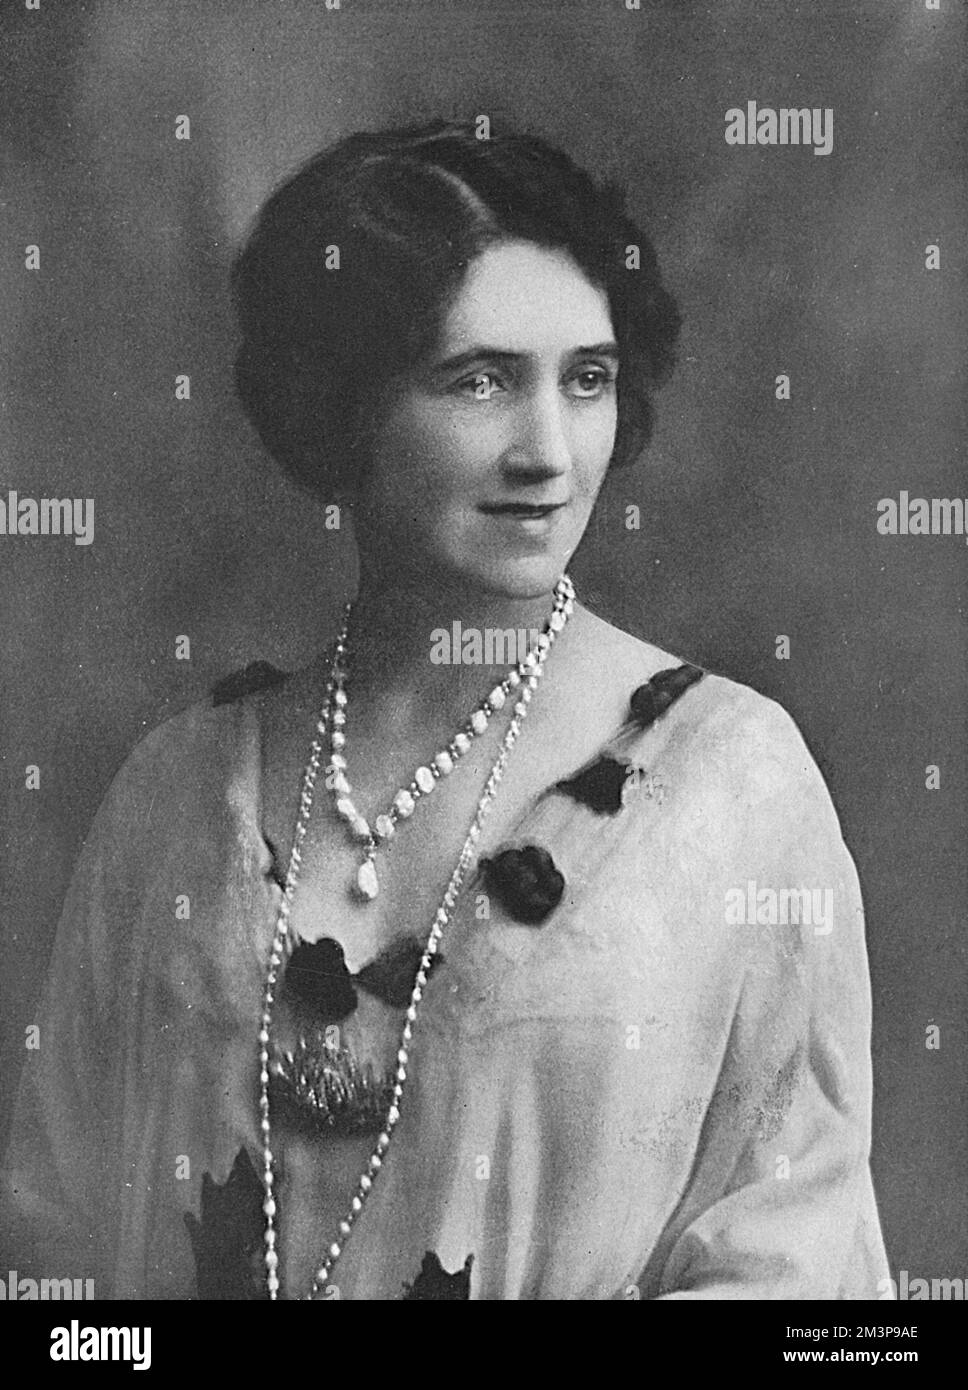 Pamela Bulwer-Lytton (n&#x9960;Chichele-Plowden), Countess of Lytton, who ran her own hospital for wounded soldiers during the First World War and organised a number of entertainments and enterprises in connection with raising money for war funds.       Date: 1917 Stock Photo